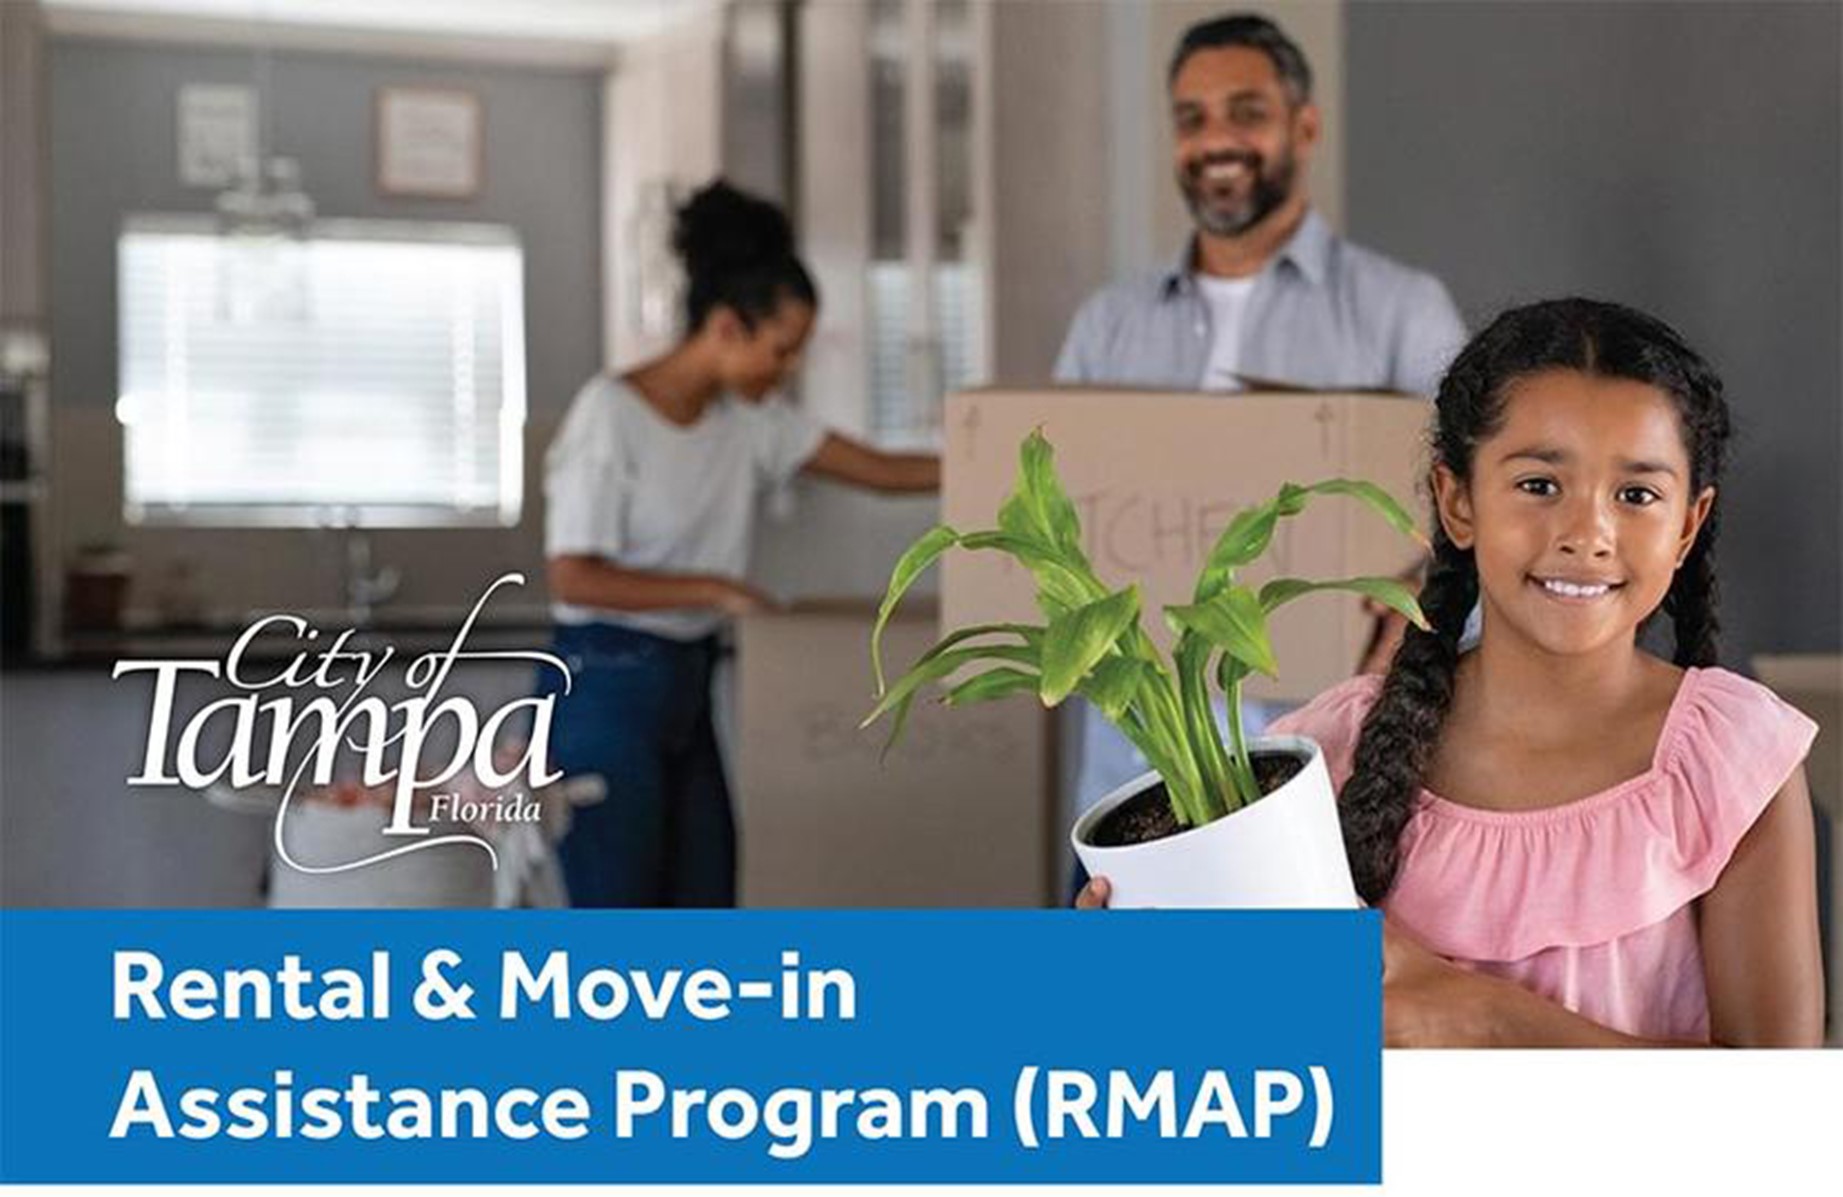 Rental and Move-in Assistance Program (RMAP)